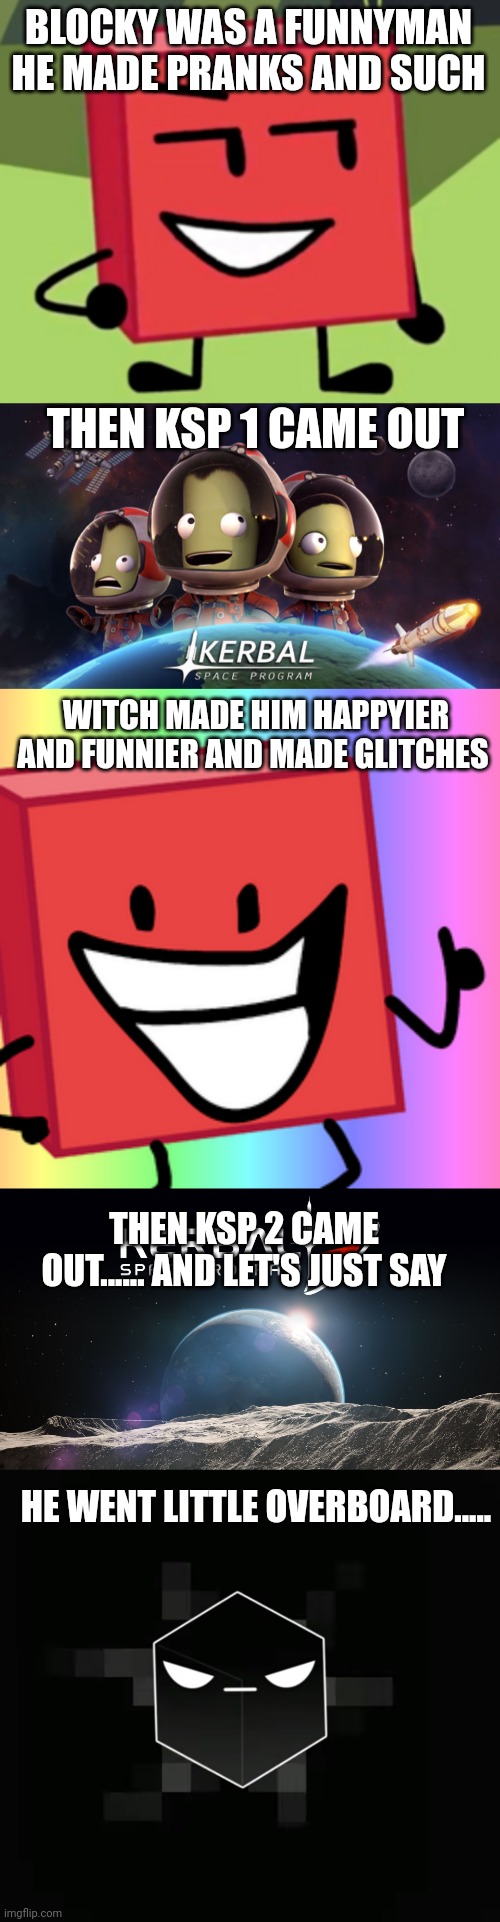 Blocky's backstory | BLOCKY WAS A FUNNYMAN HE MADE PRANKS AND SUCH; THEN KSP 1 CAME OUT; WITCH MADE HIM HAPPYIER AND FUNNIER AND MADE GLITCHES; THEN KSP 2 CAME OUT...... AND LET'S JUST SAY; HE WENT LITTLE OVERBOARD..... | image tagged in bfdi | made w/ Imgflip meme maker